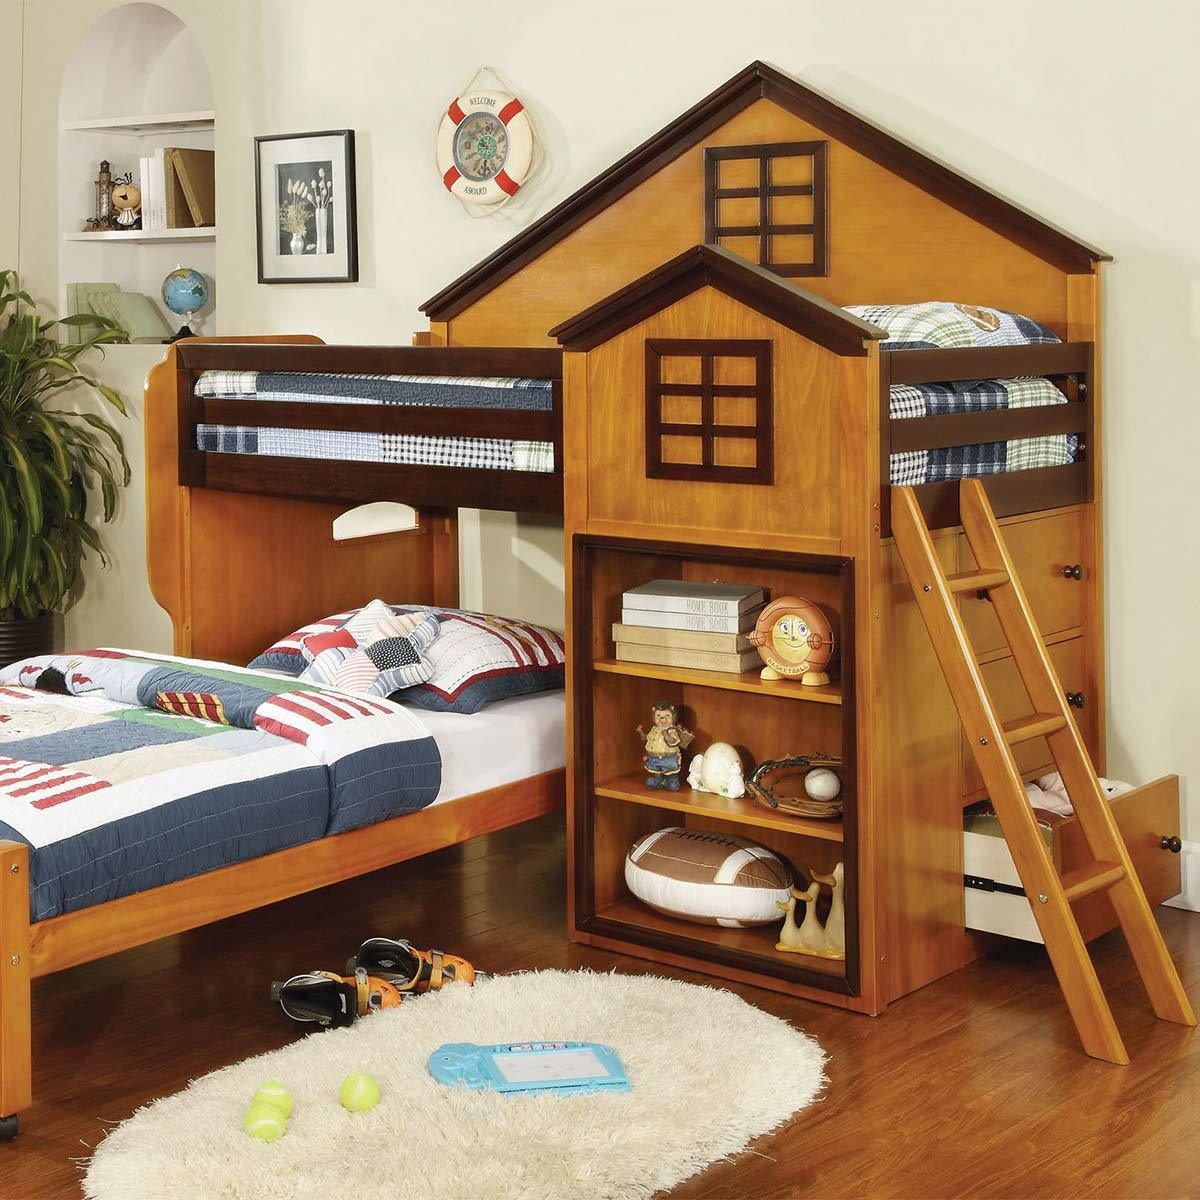 14 Of The Coolest Beds You Can Buy Today The Family Handyman